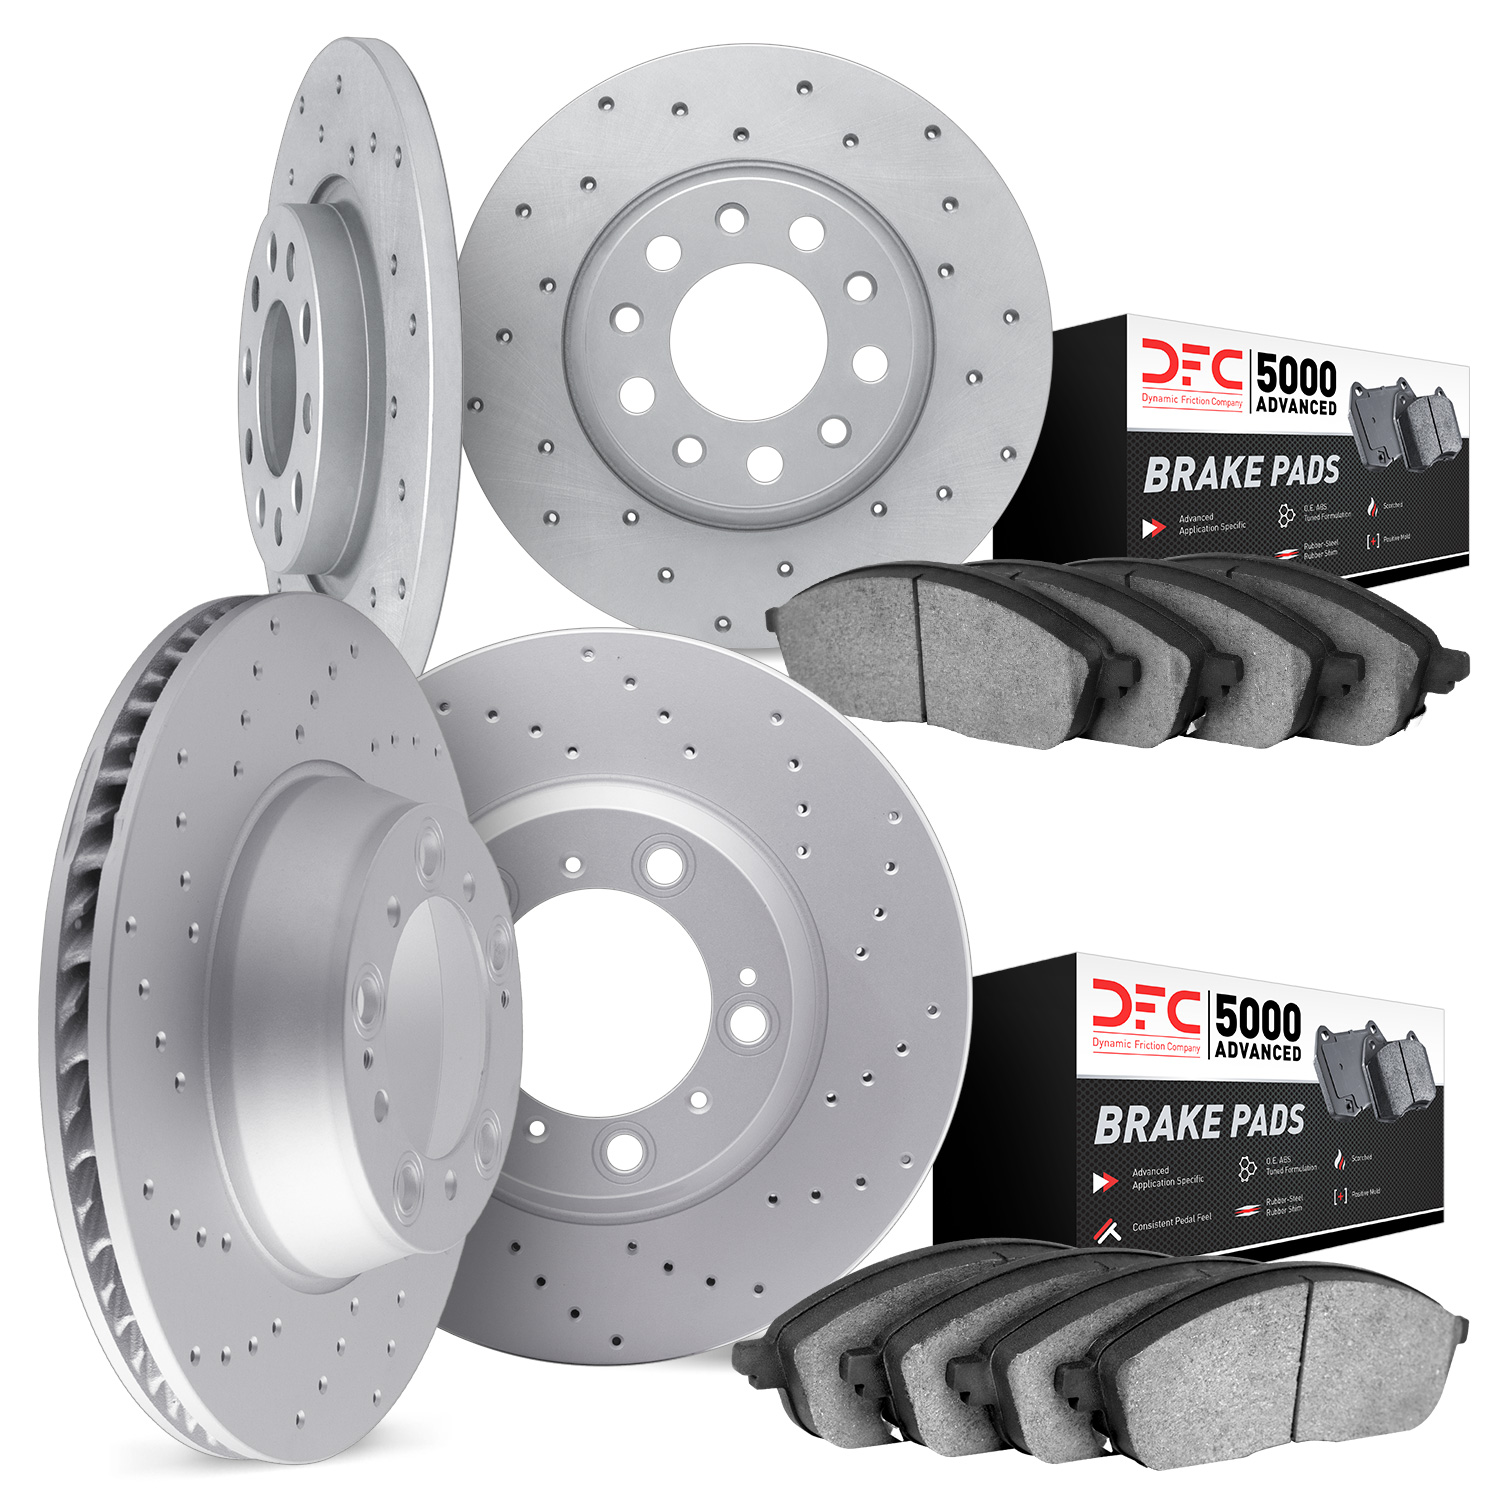 2704-58007 Geoperformance Drilled Brake Rotors with Active Performance Pads Kit, 2004-2008 Acura/Honda, Position: Front and Rear